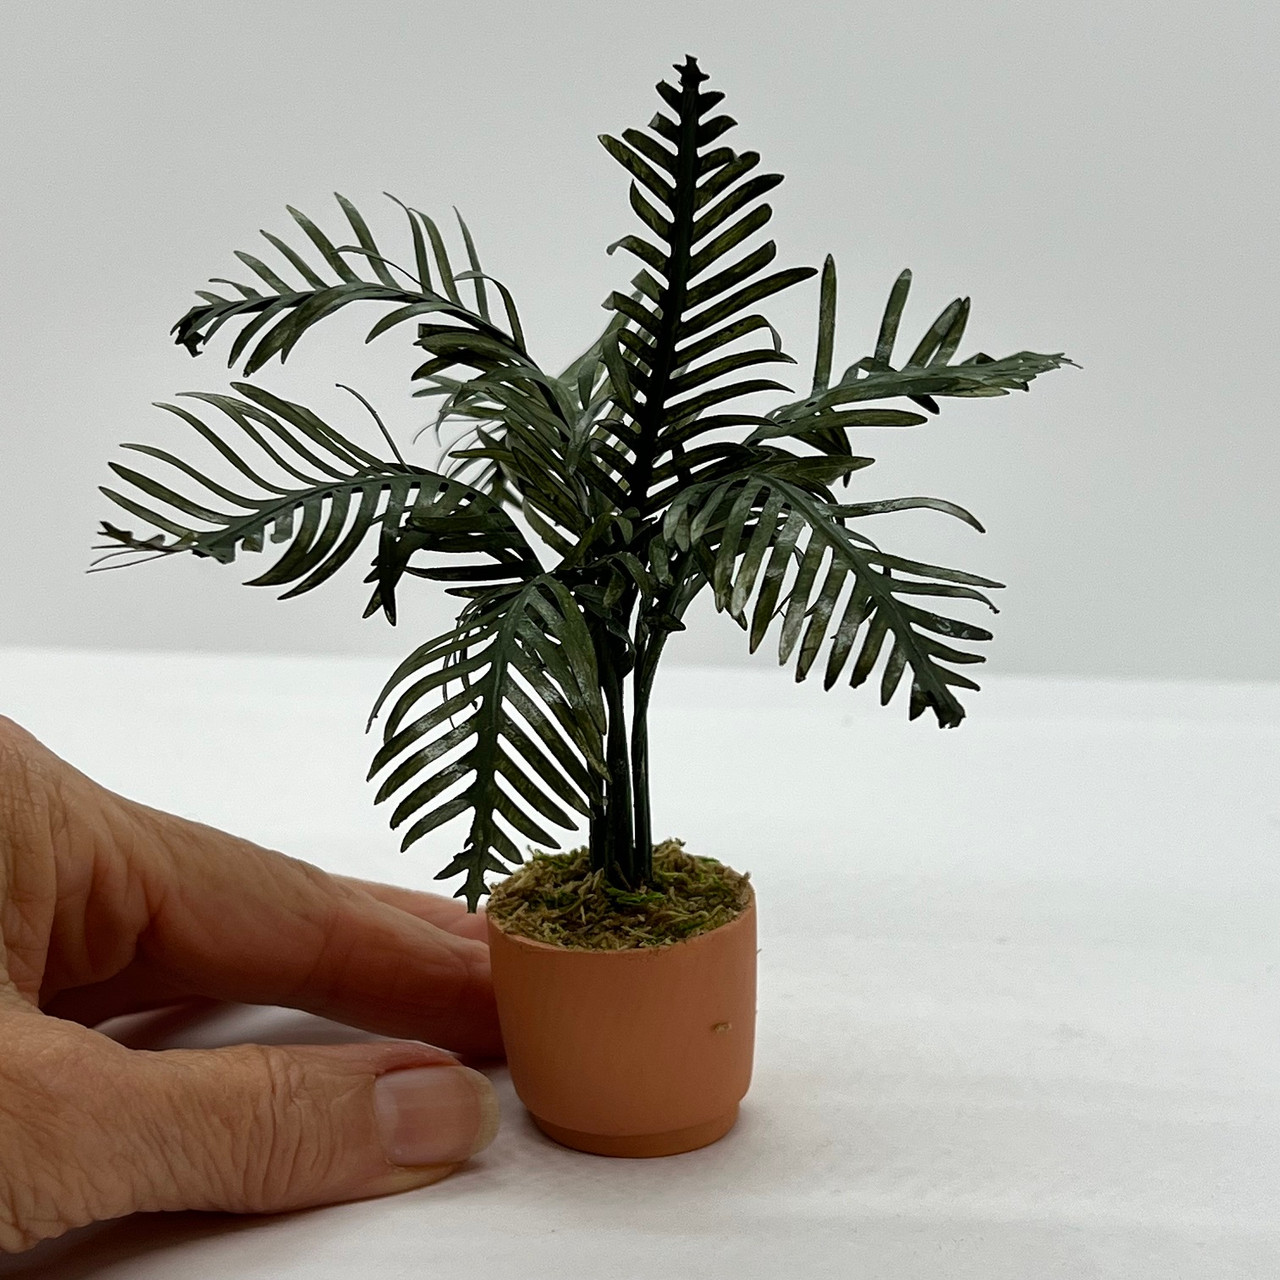 Palm in Large Contemporary Pot (UFN3016) shown with hand for scale